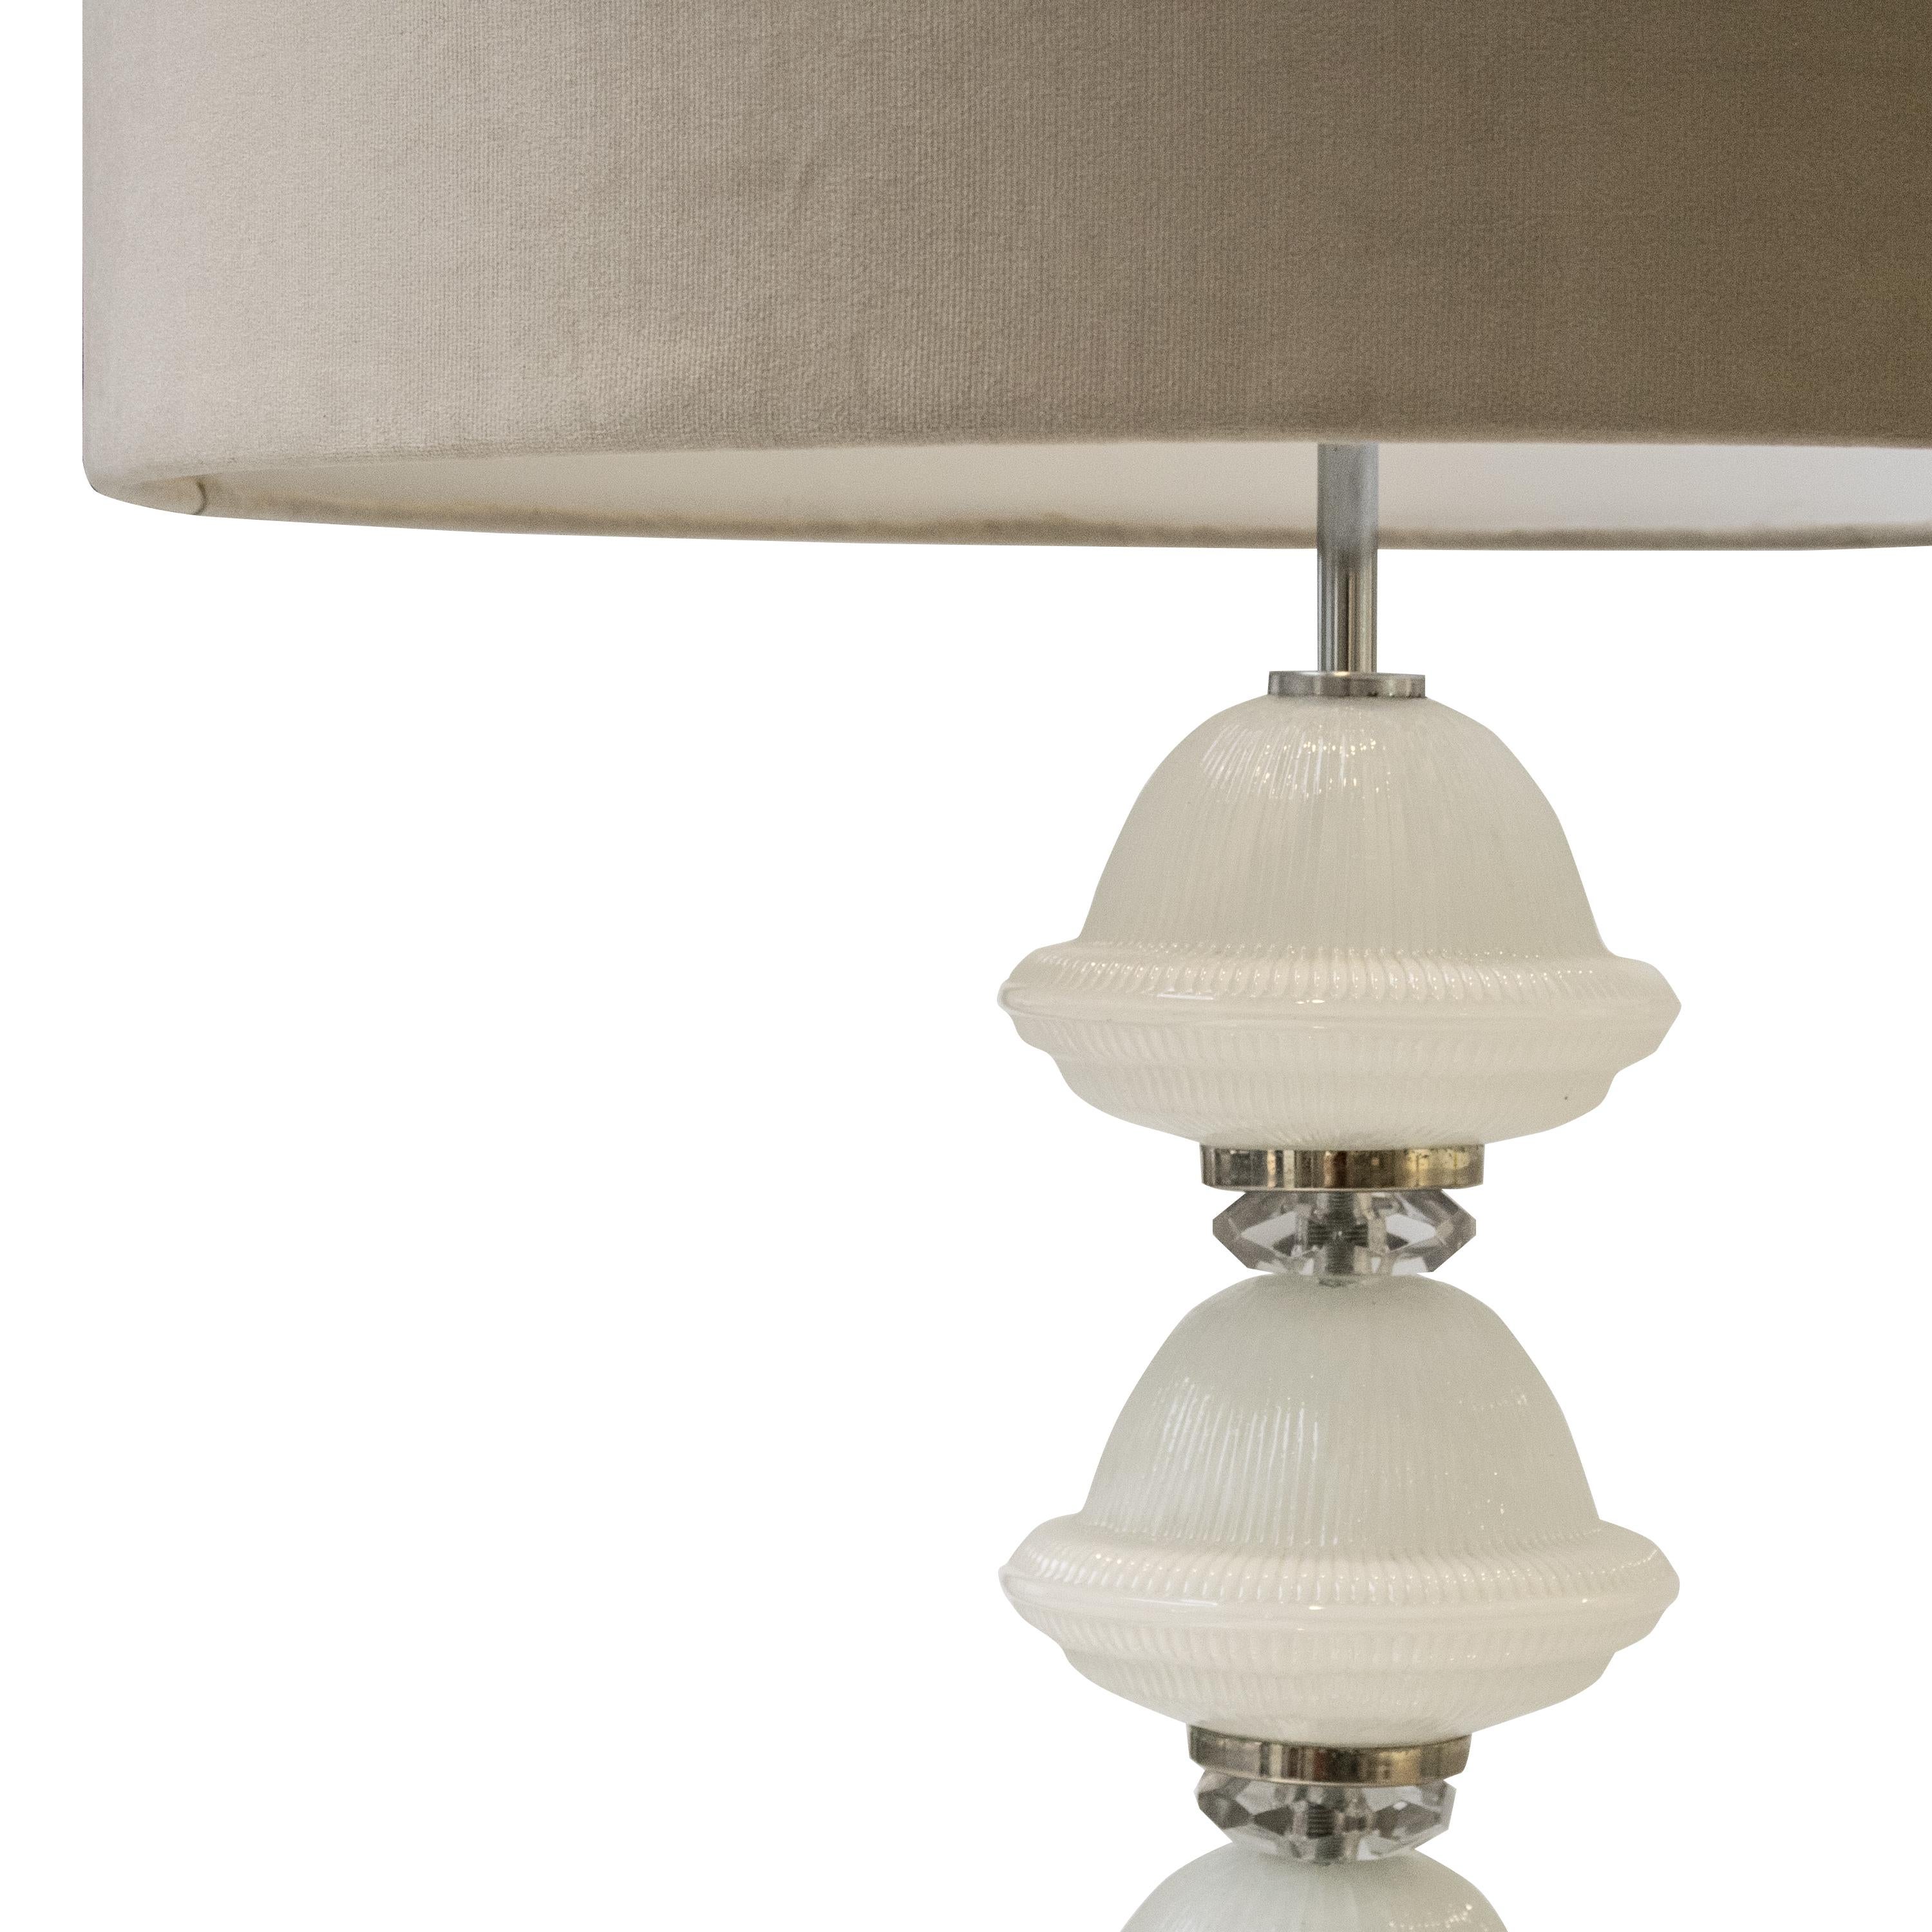 Table lamp composed of a foot made of a chromed steel structure with handmade white Murano glass tulips and two points of light. Lamp shade made of grey velvetfabric.